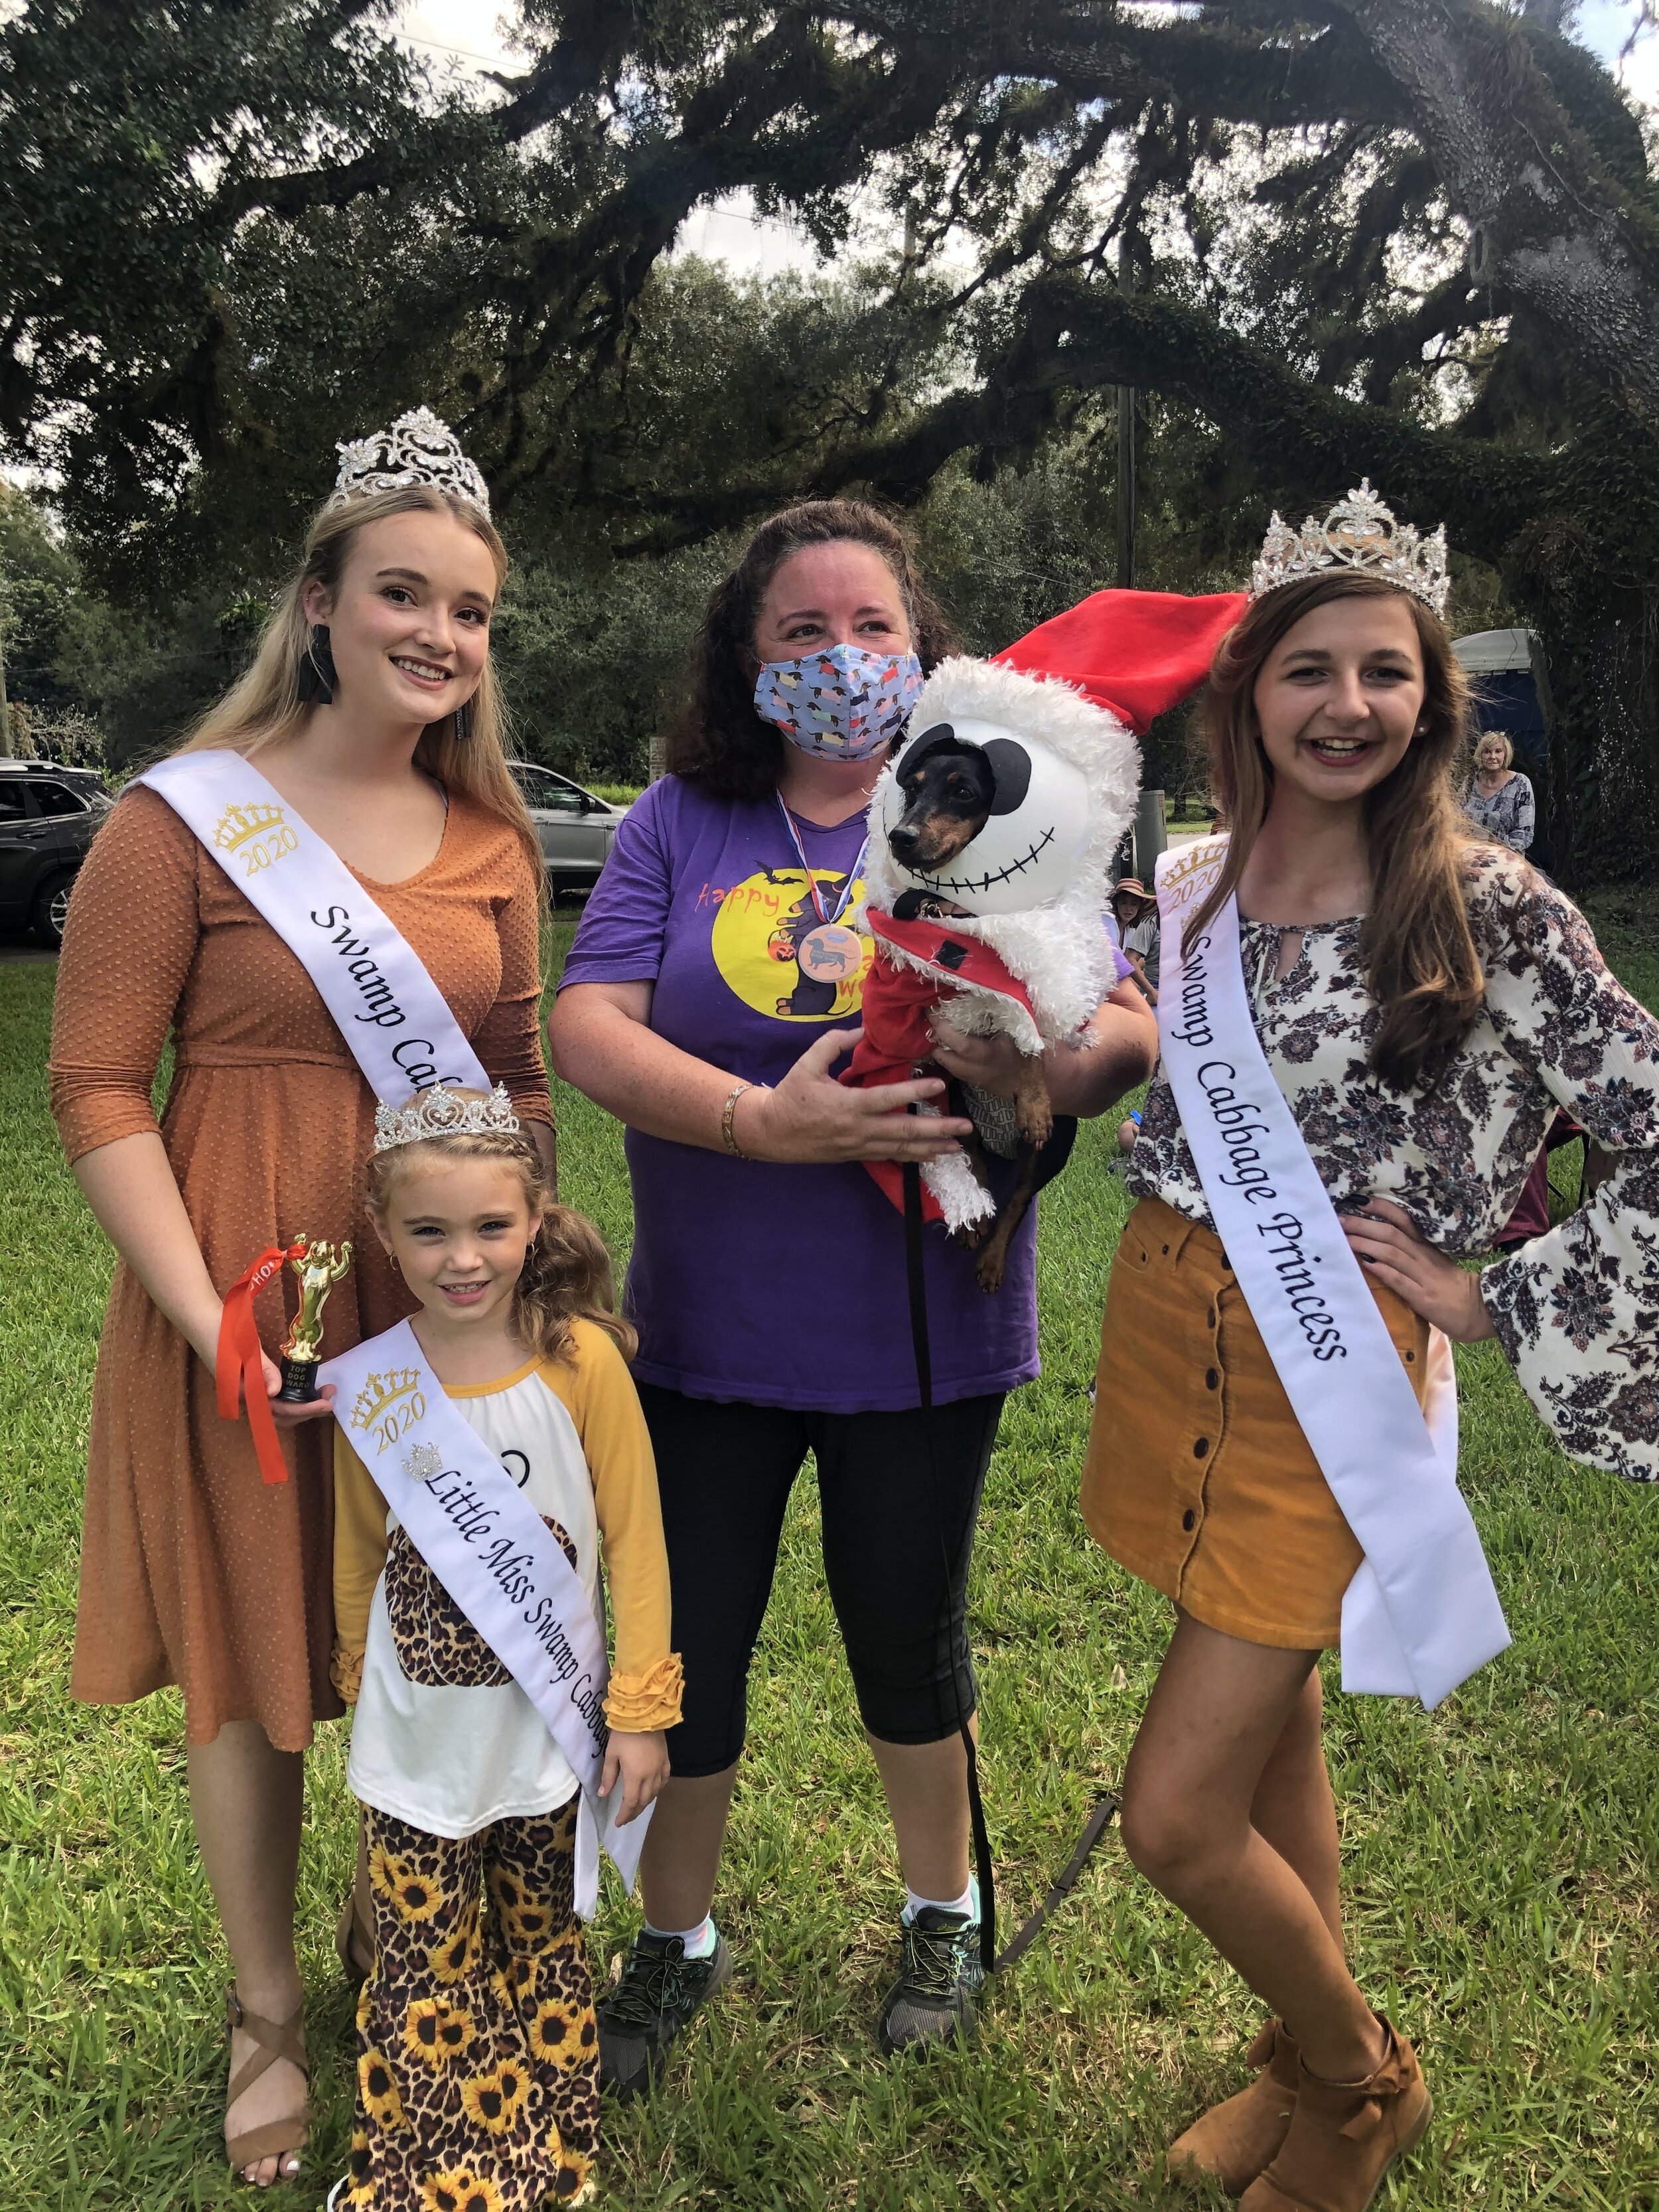 Tampa Doxie Posse - Winner of the Most Creative Costume